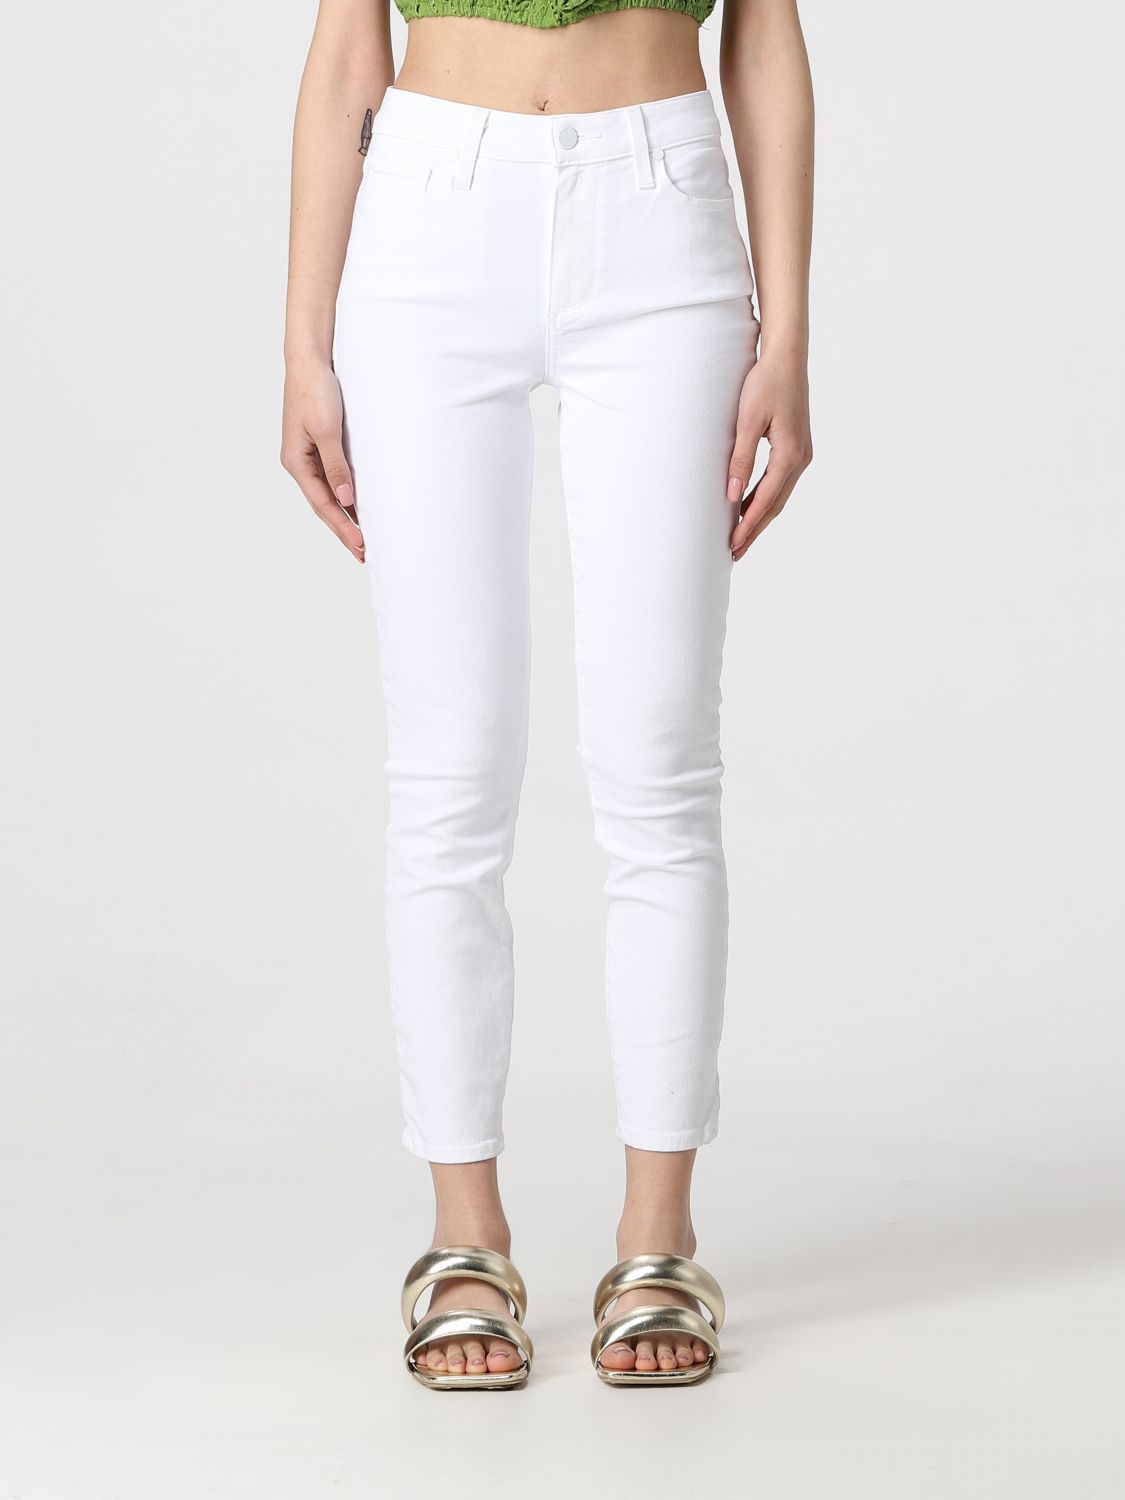 PAIGE: jeans for woman - White | Paige jeans 19142084520 online on ...